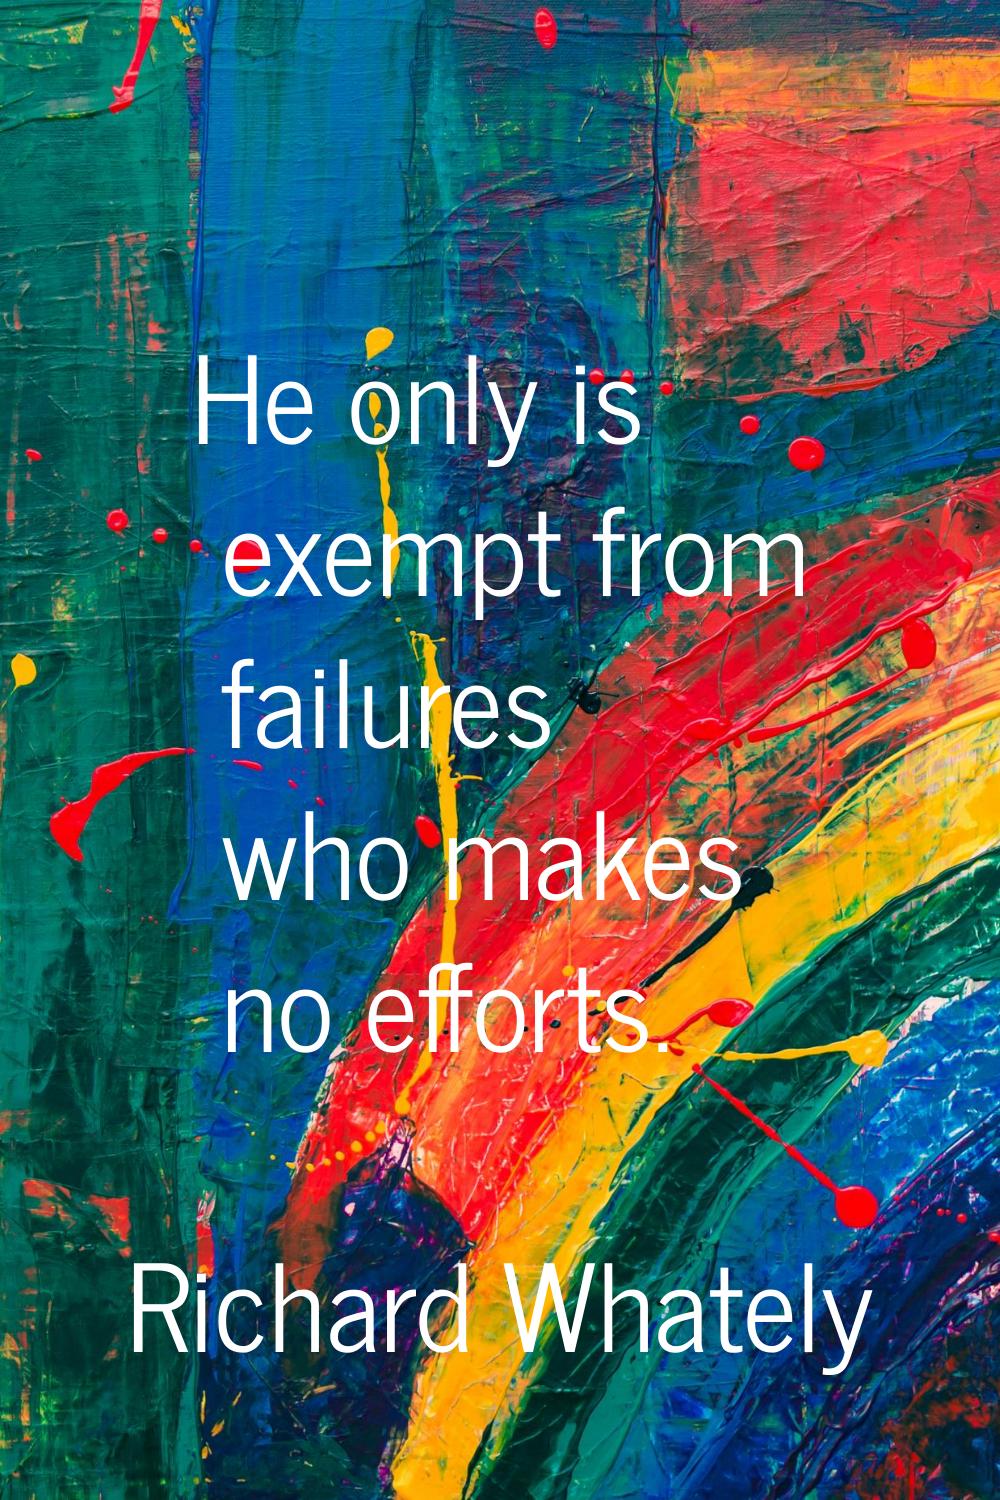 He only is exempt from failures who makes no efforts.